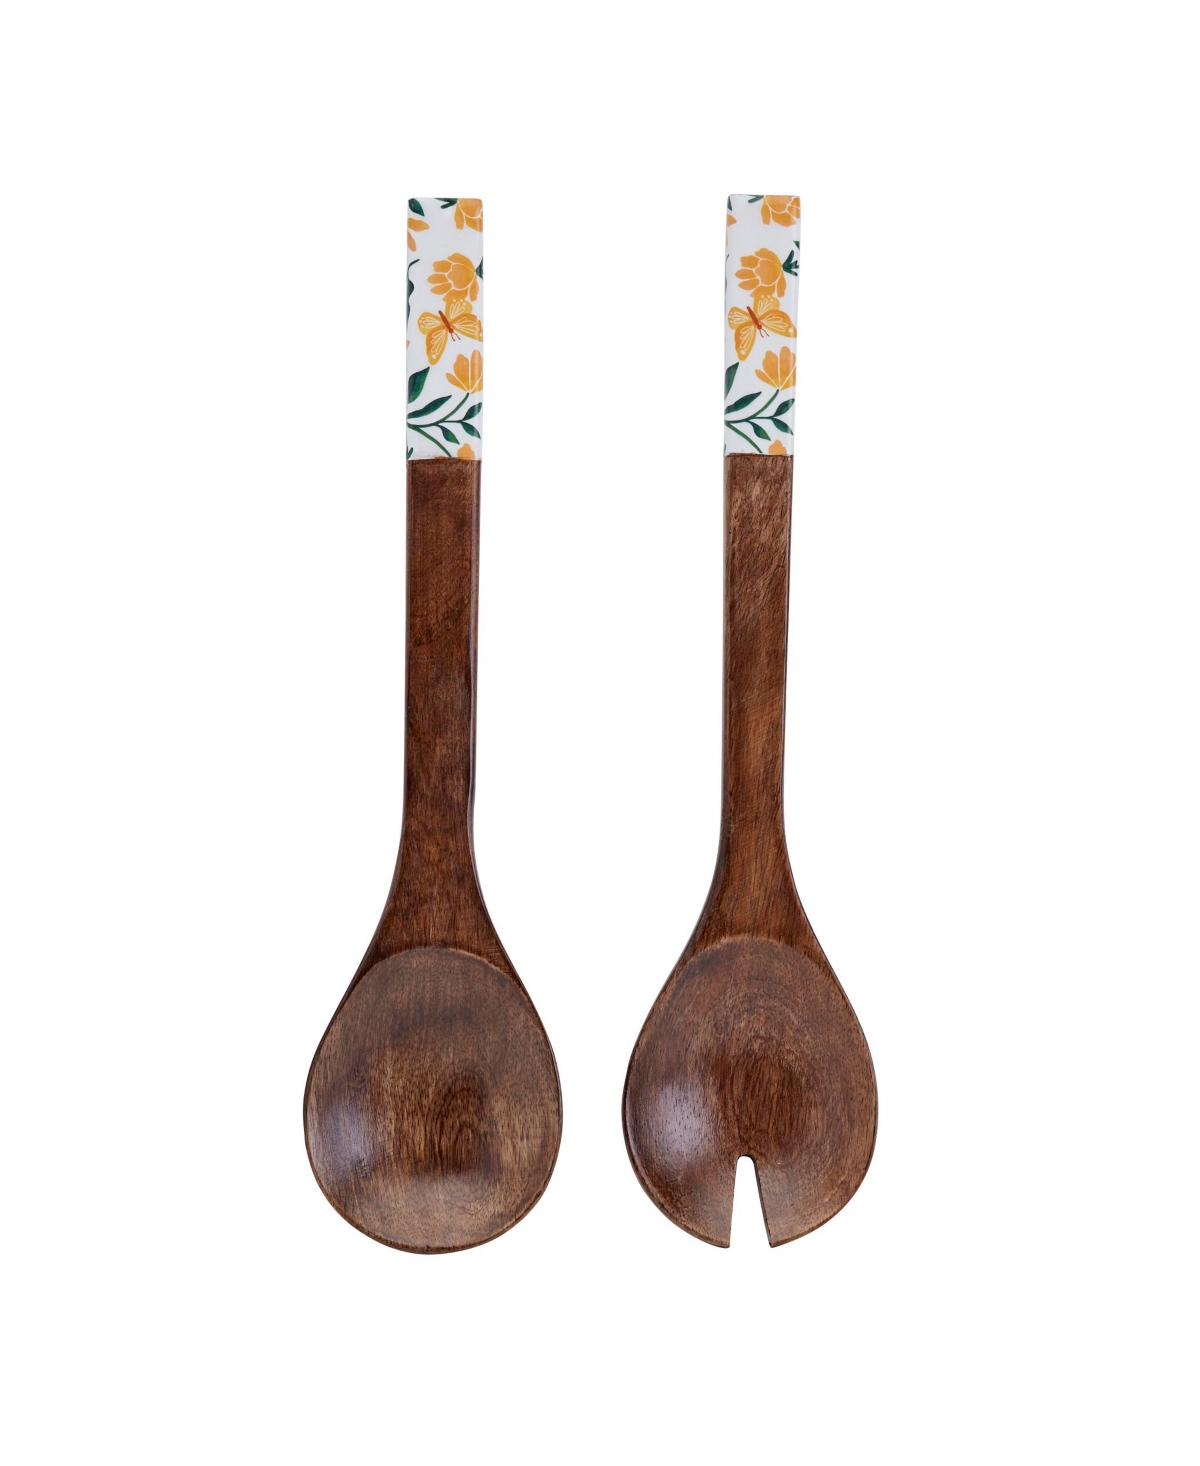 Dolly Parton 2 Piece Salad Servers Set In Yellow